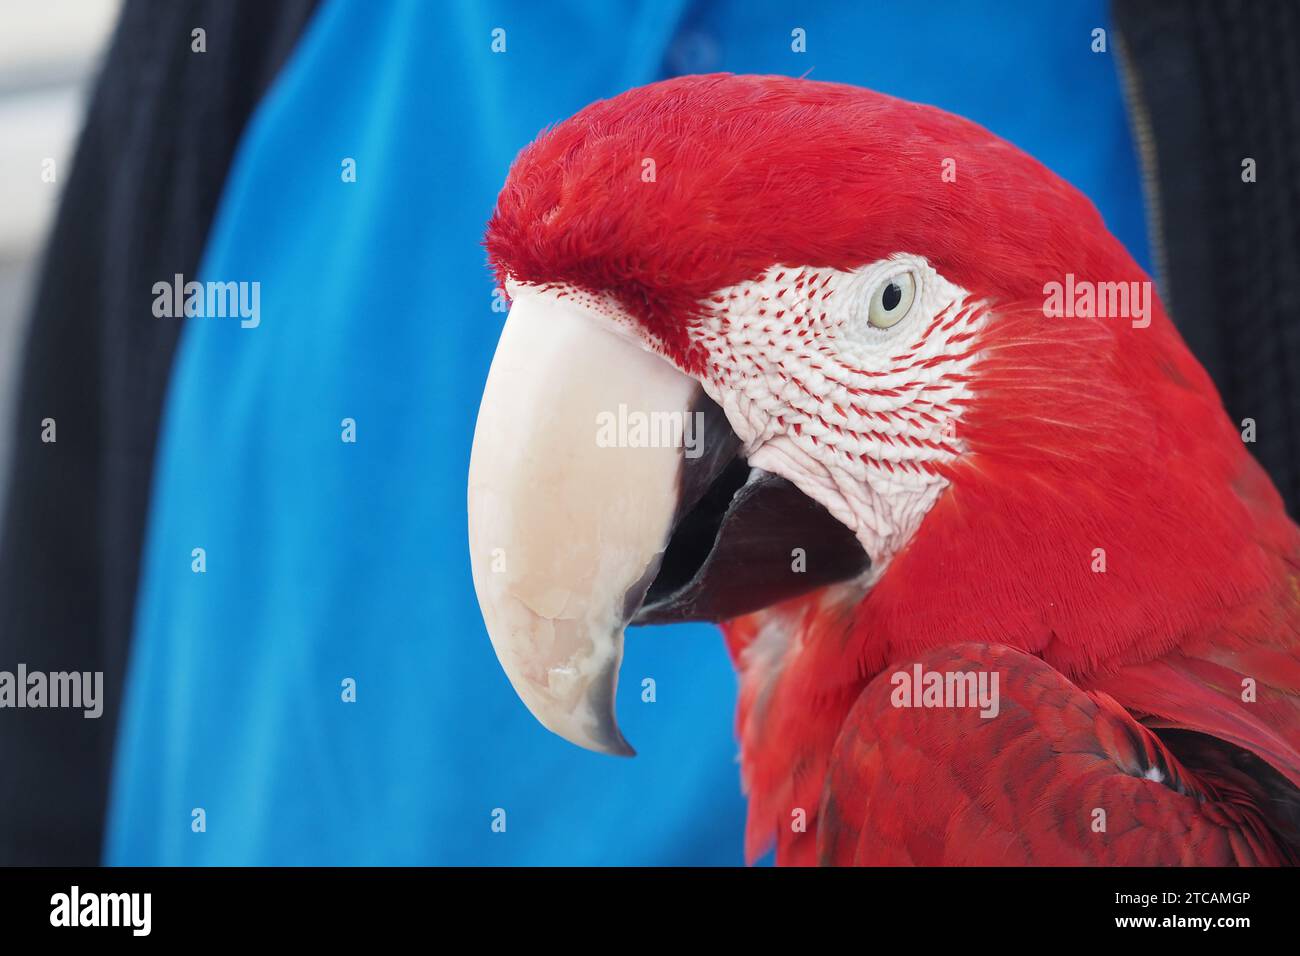 closeup colorful red green macaw parrot bird on person hand  Stock Photo